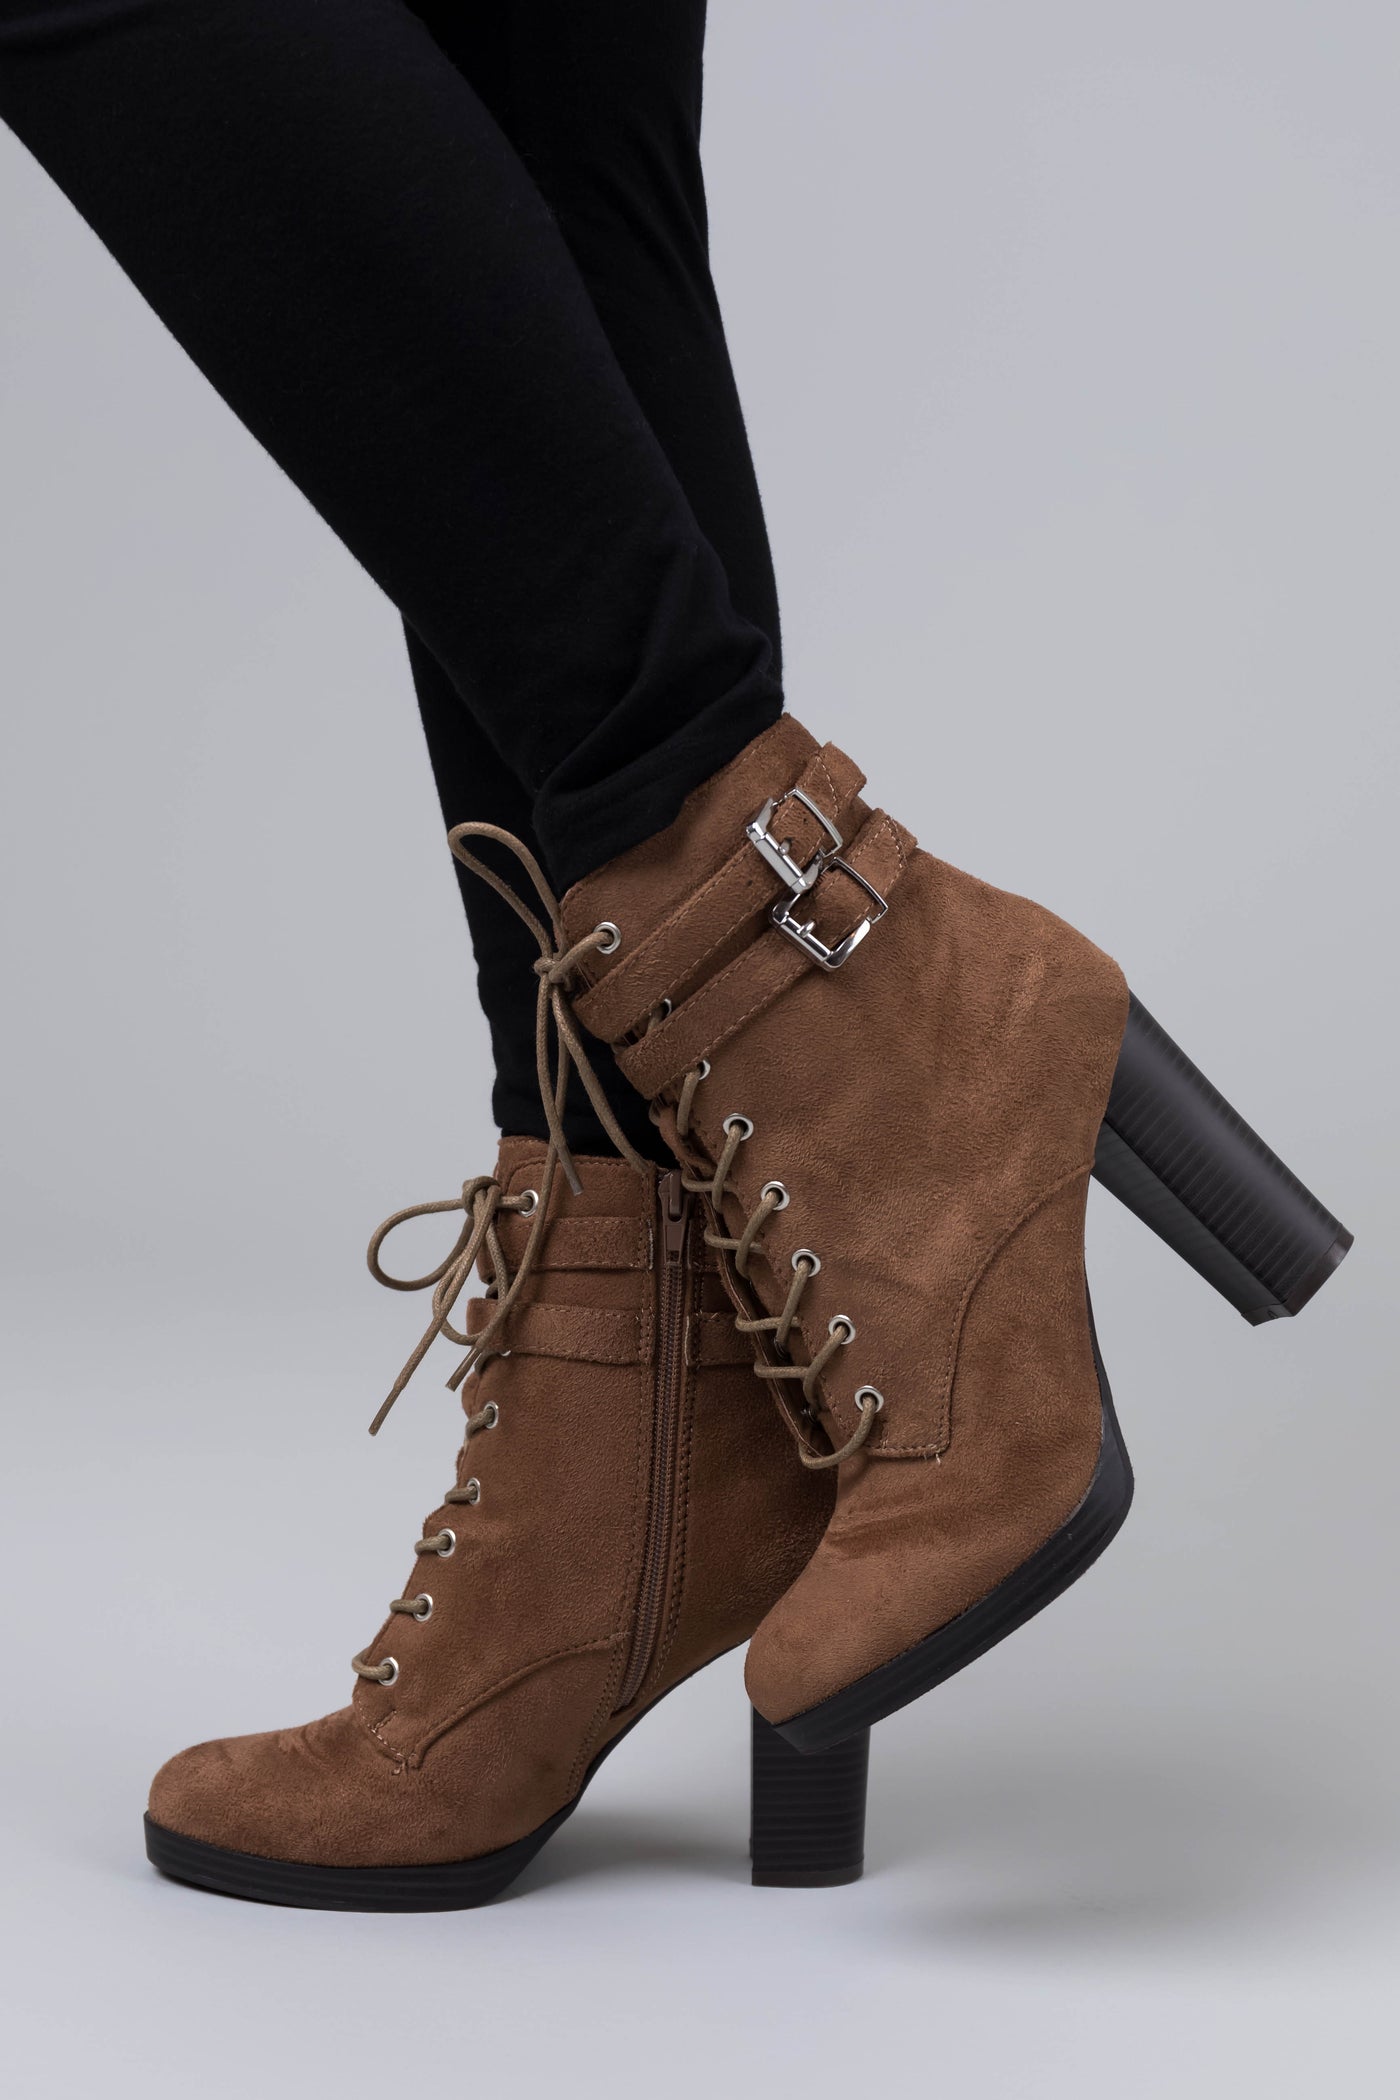 Milk Chocolate Faux Suede Lace Up High Heel Booties